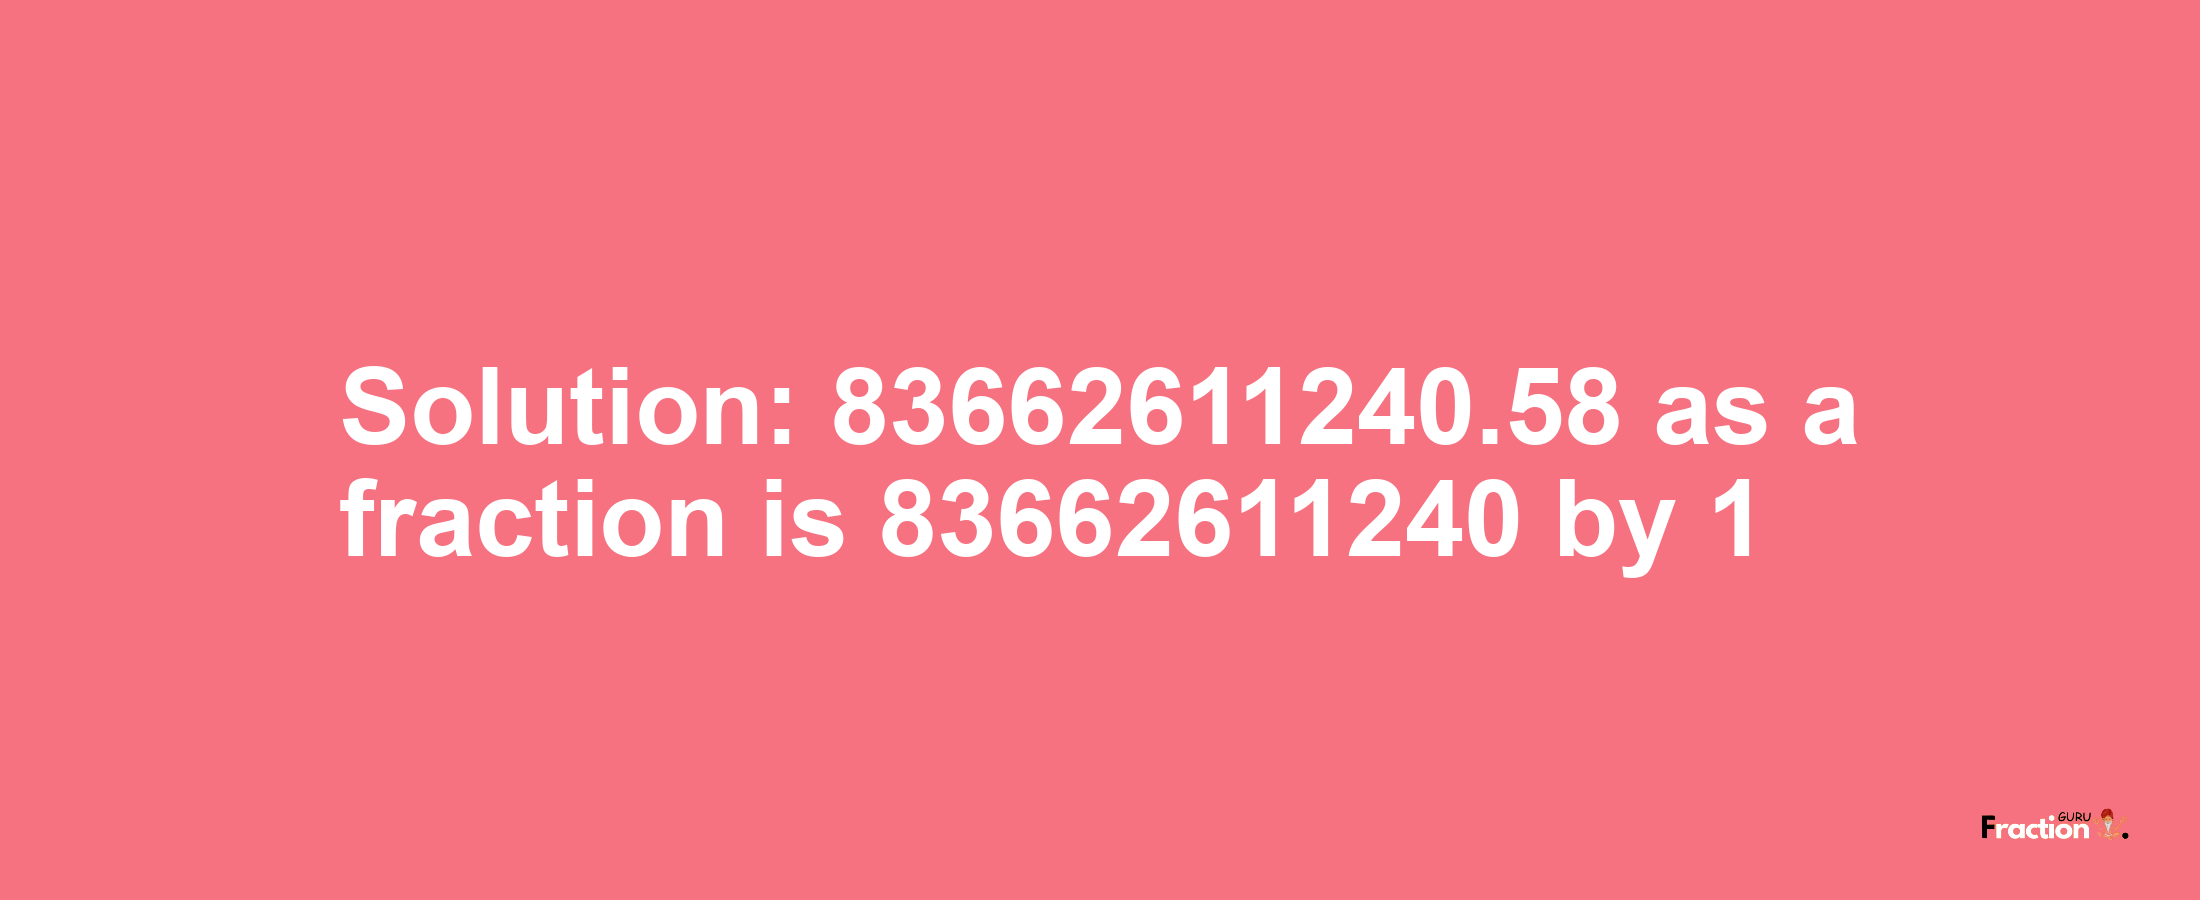 Solution:83662611240.58 as a fraction is 83662611240/1